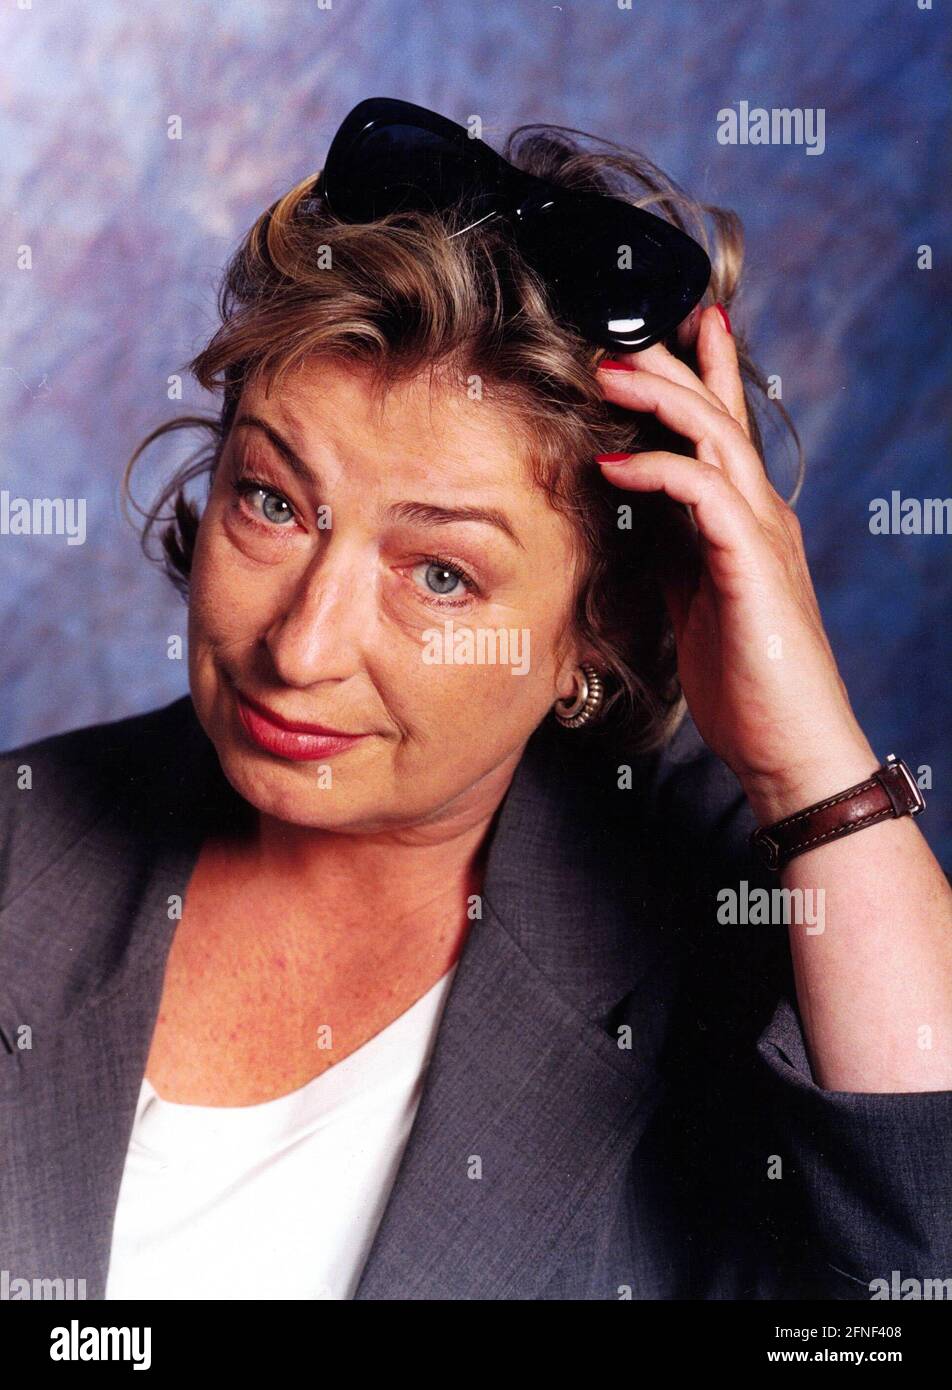 Page 2 - Brigitte Tv High Resolution Stock Photography and Images - Alamy